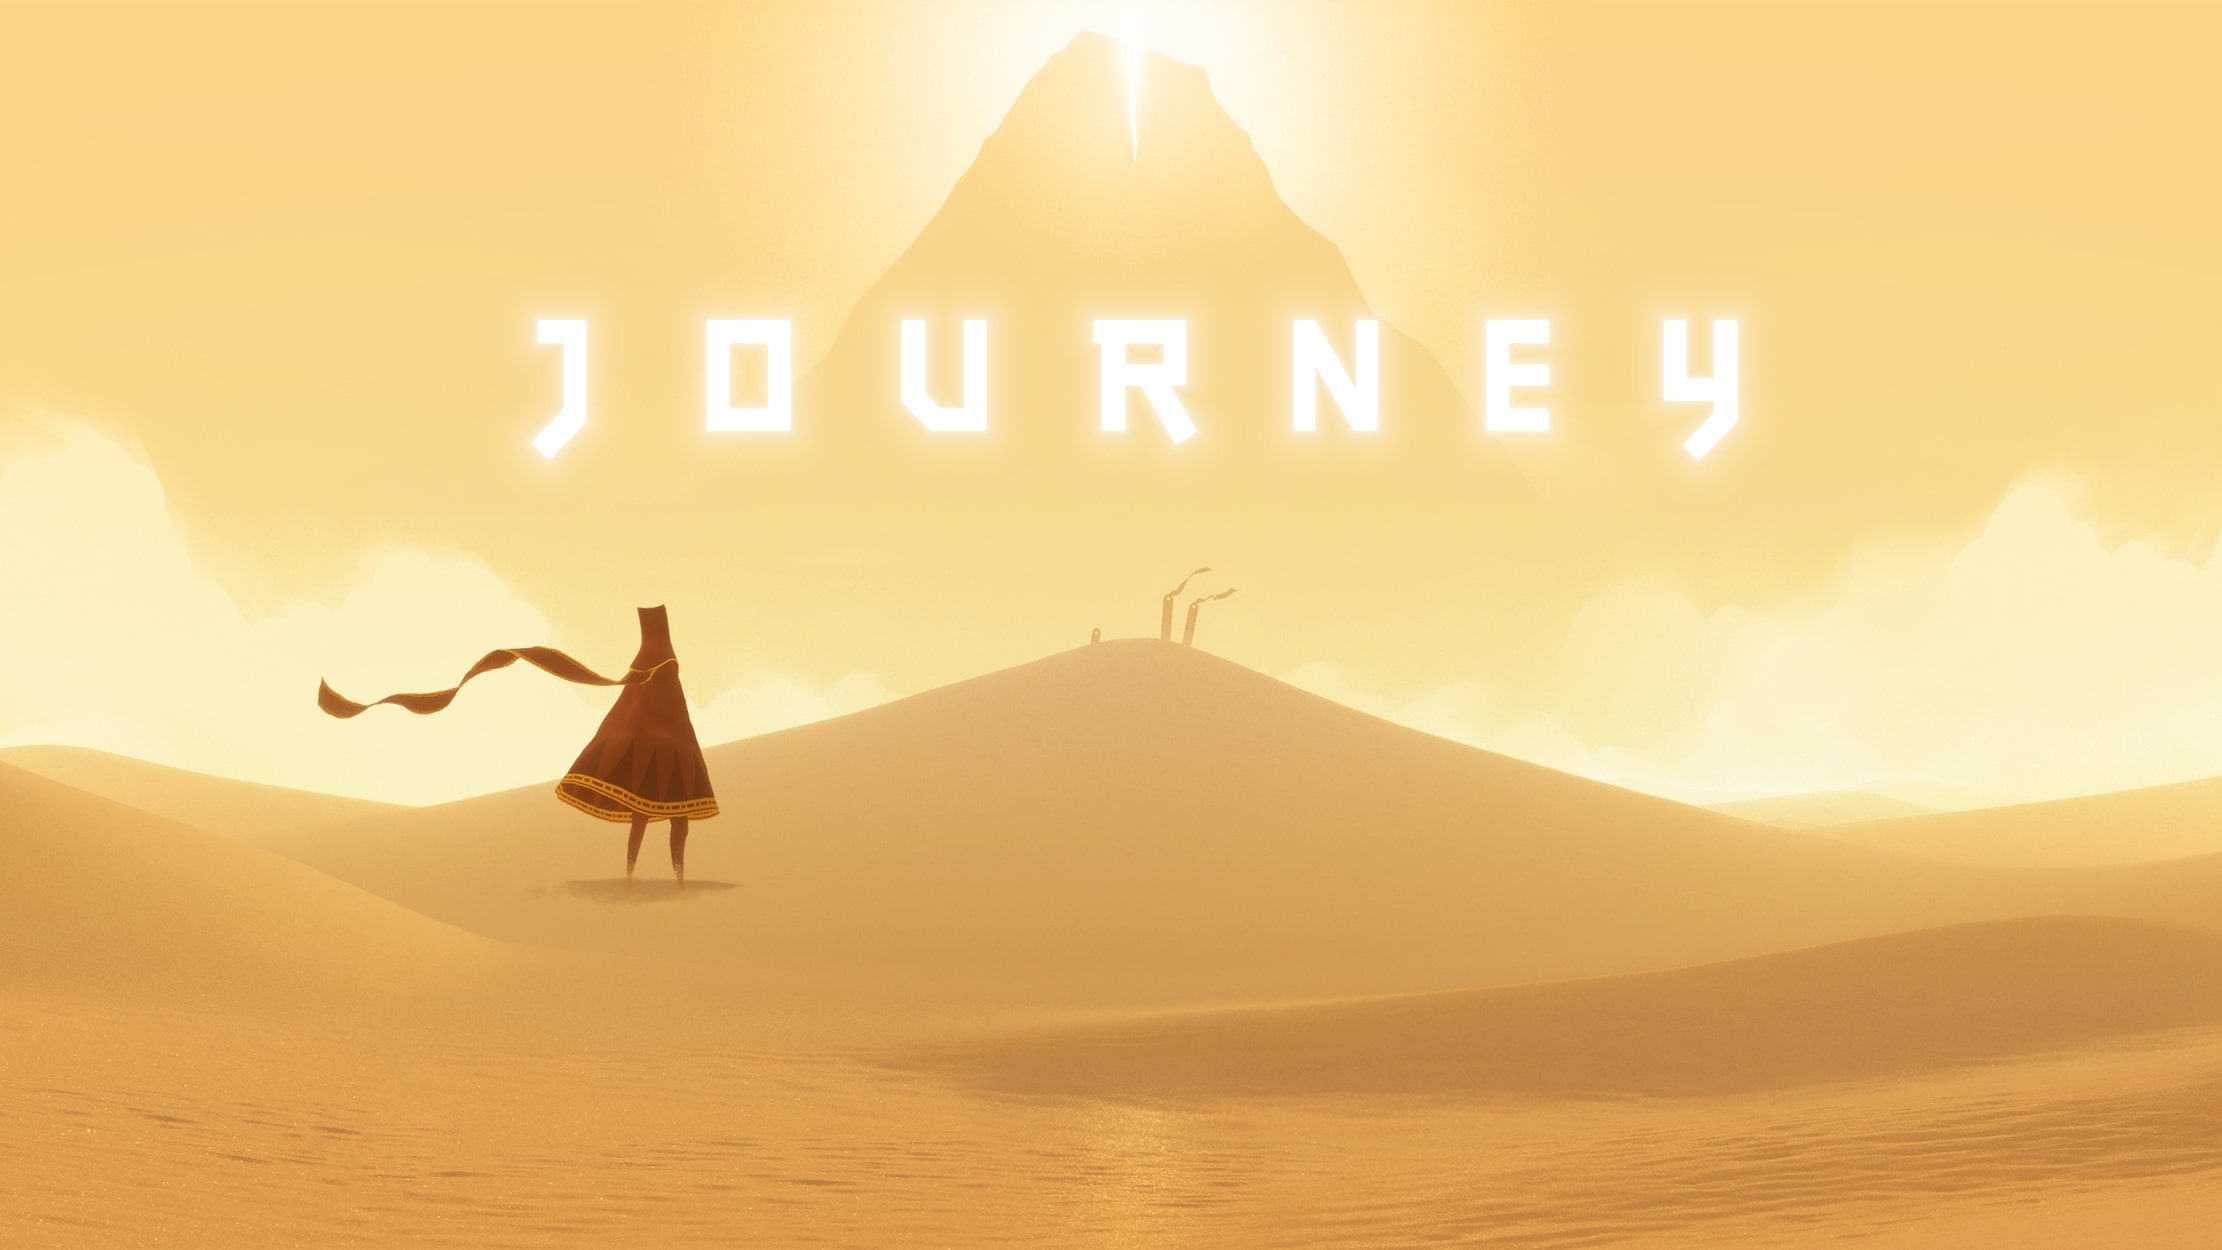 journey video game character